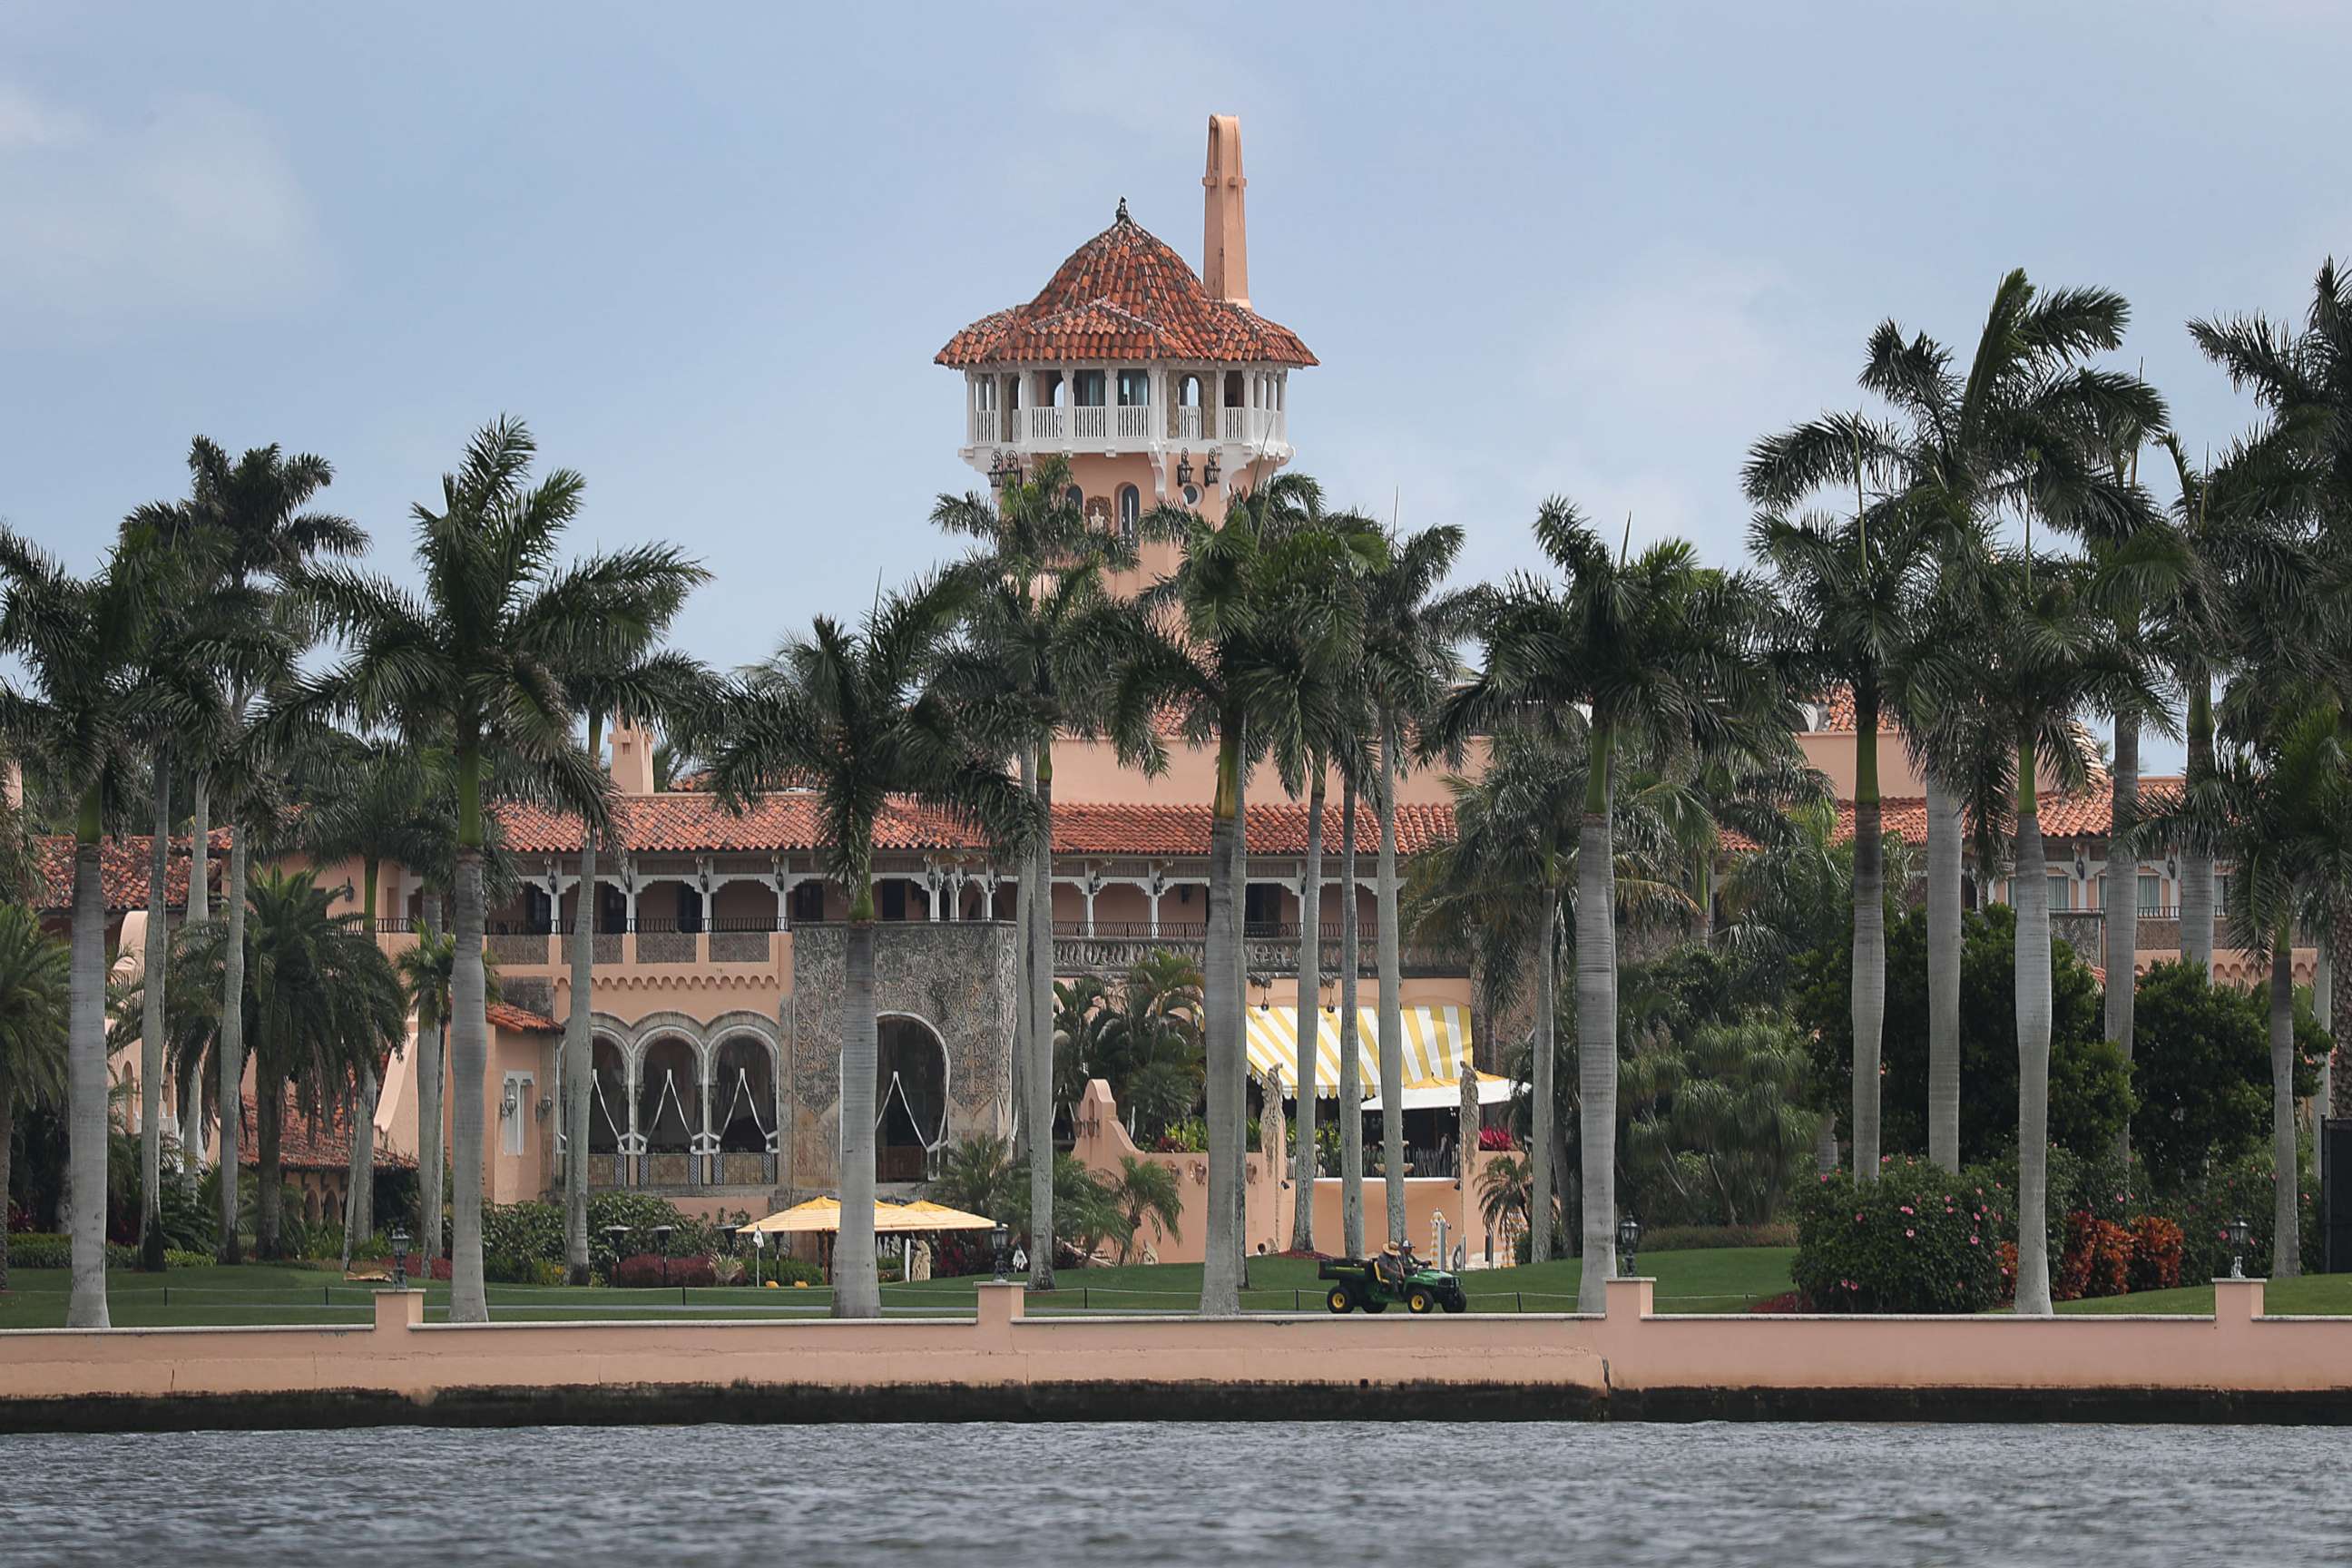 PHOTO: PPresident Donald Trump's Mar-a-Lago resort is seen on April 3, 2019 in West Palm Beach, Fla.